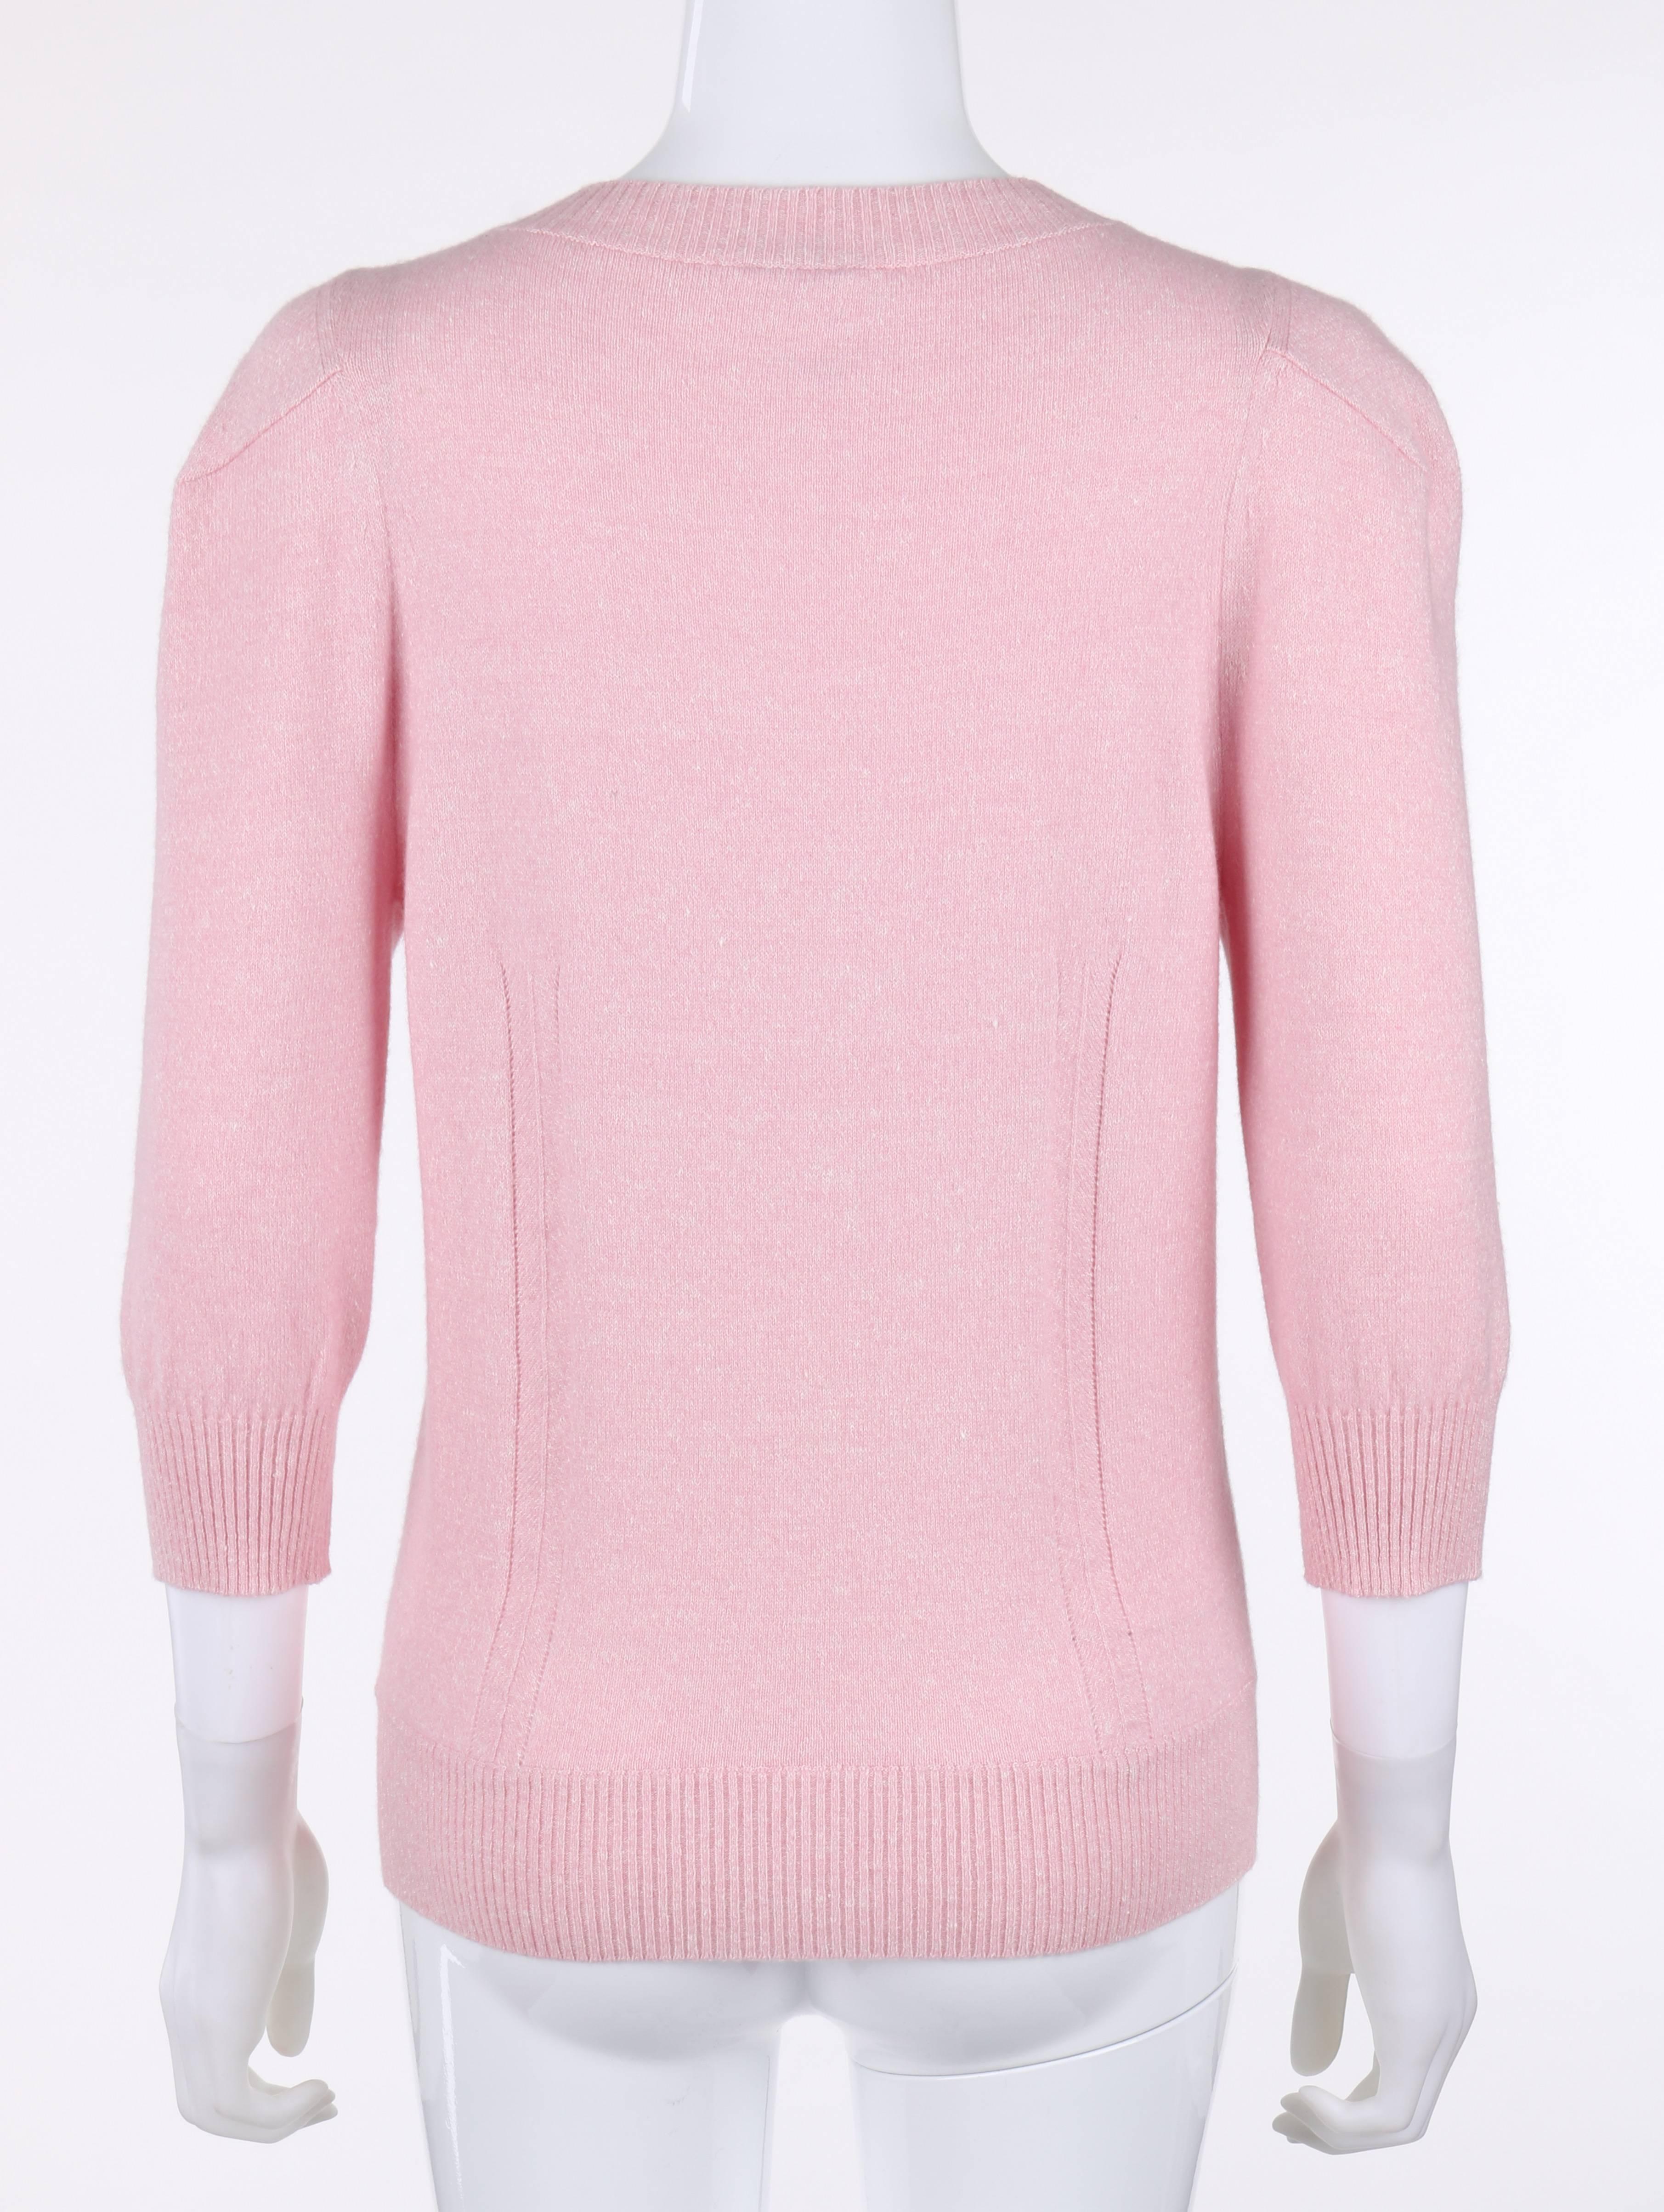 chanel pink cashmere cardigan